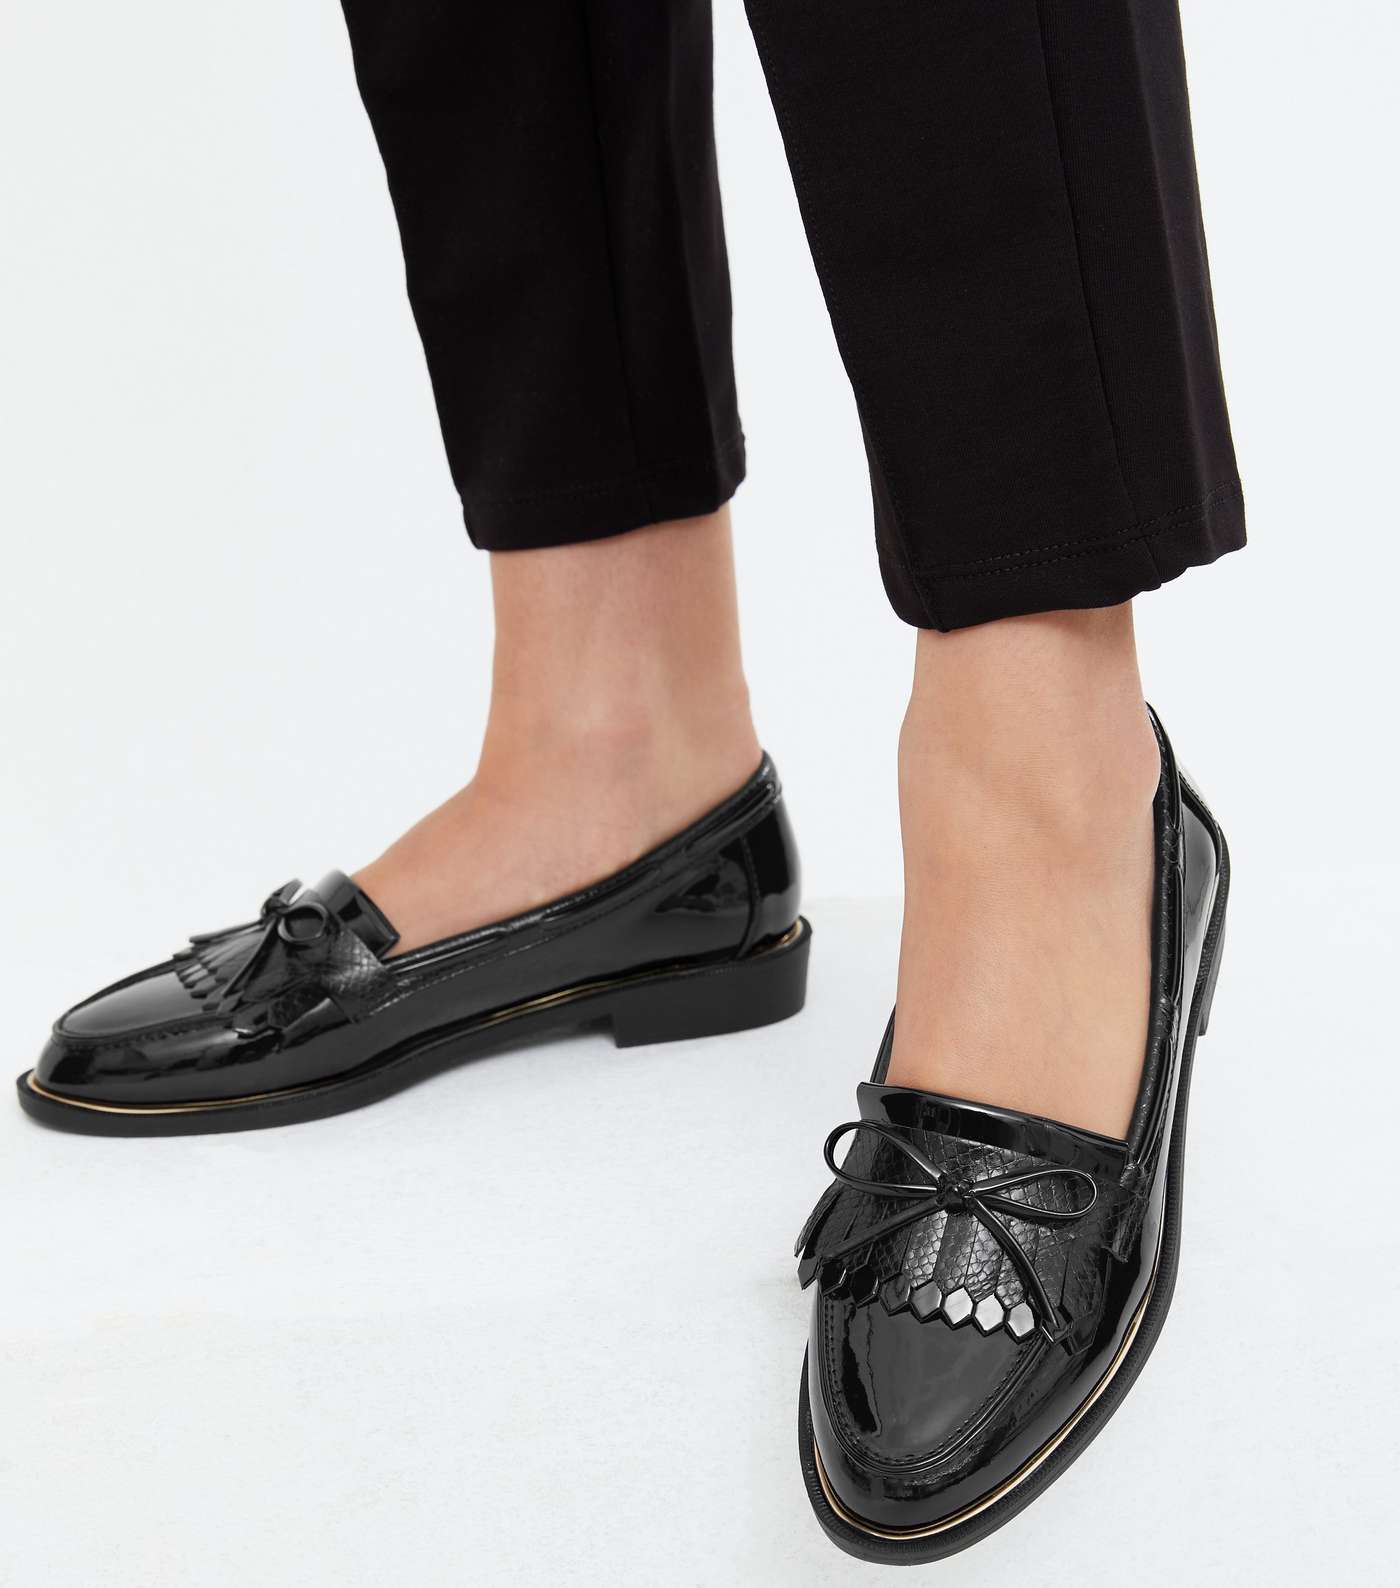 Black Patent Bow Tassel Loafers Image 2